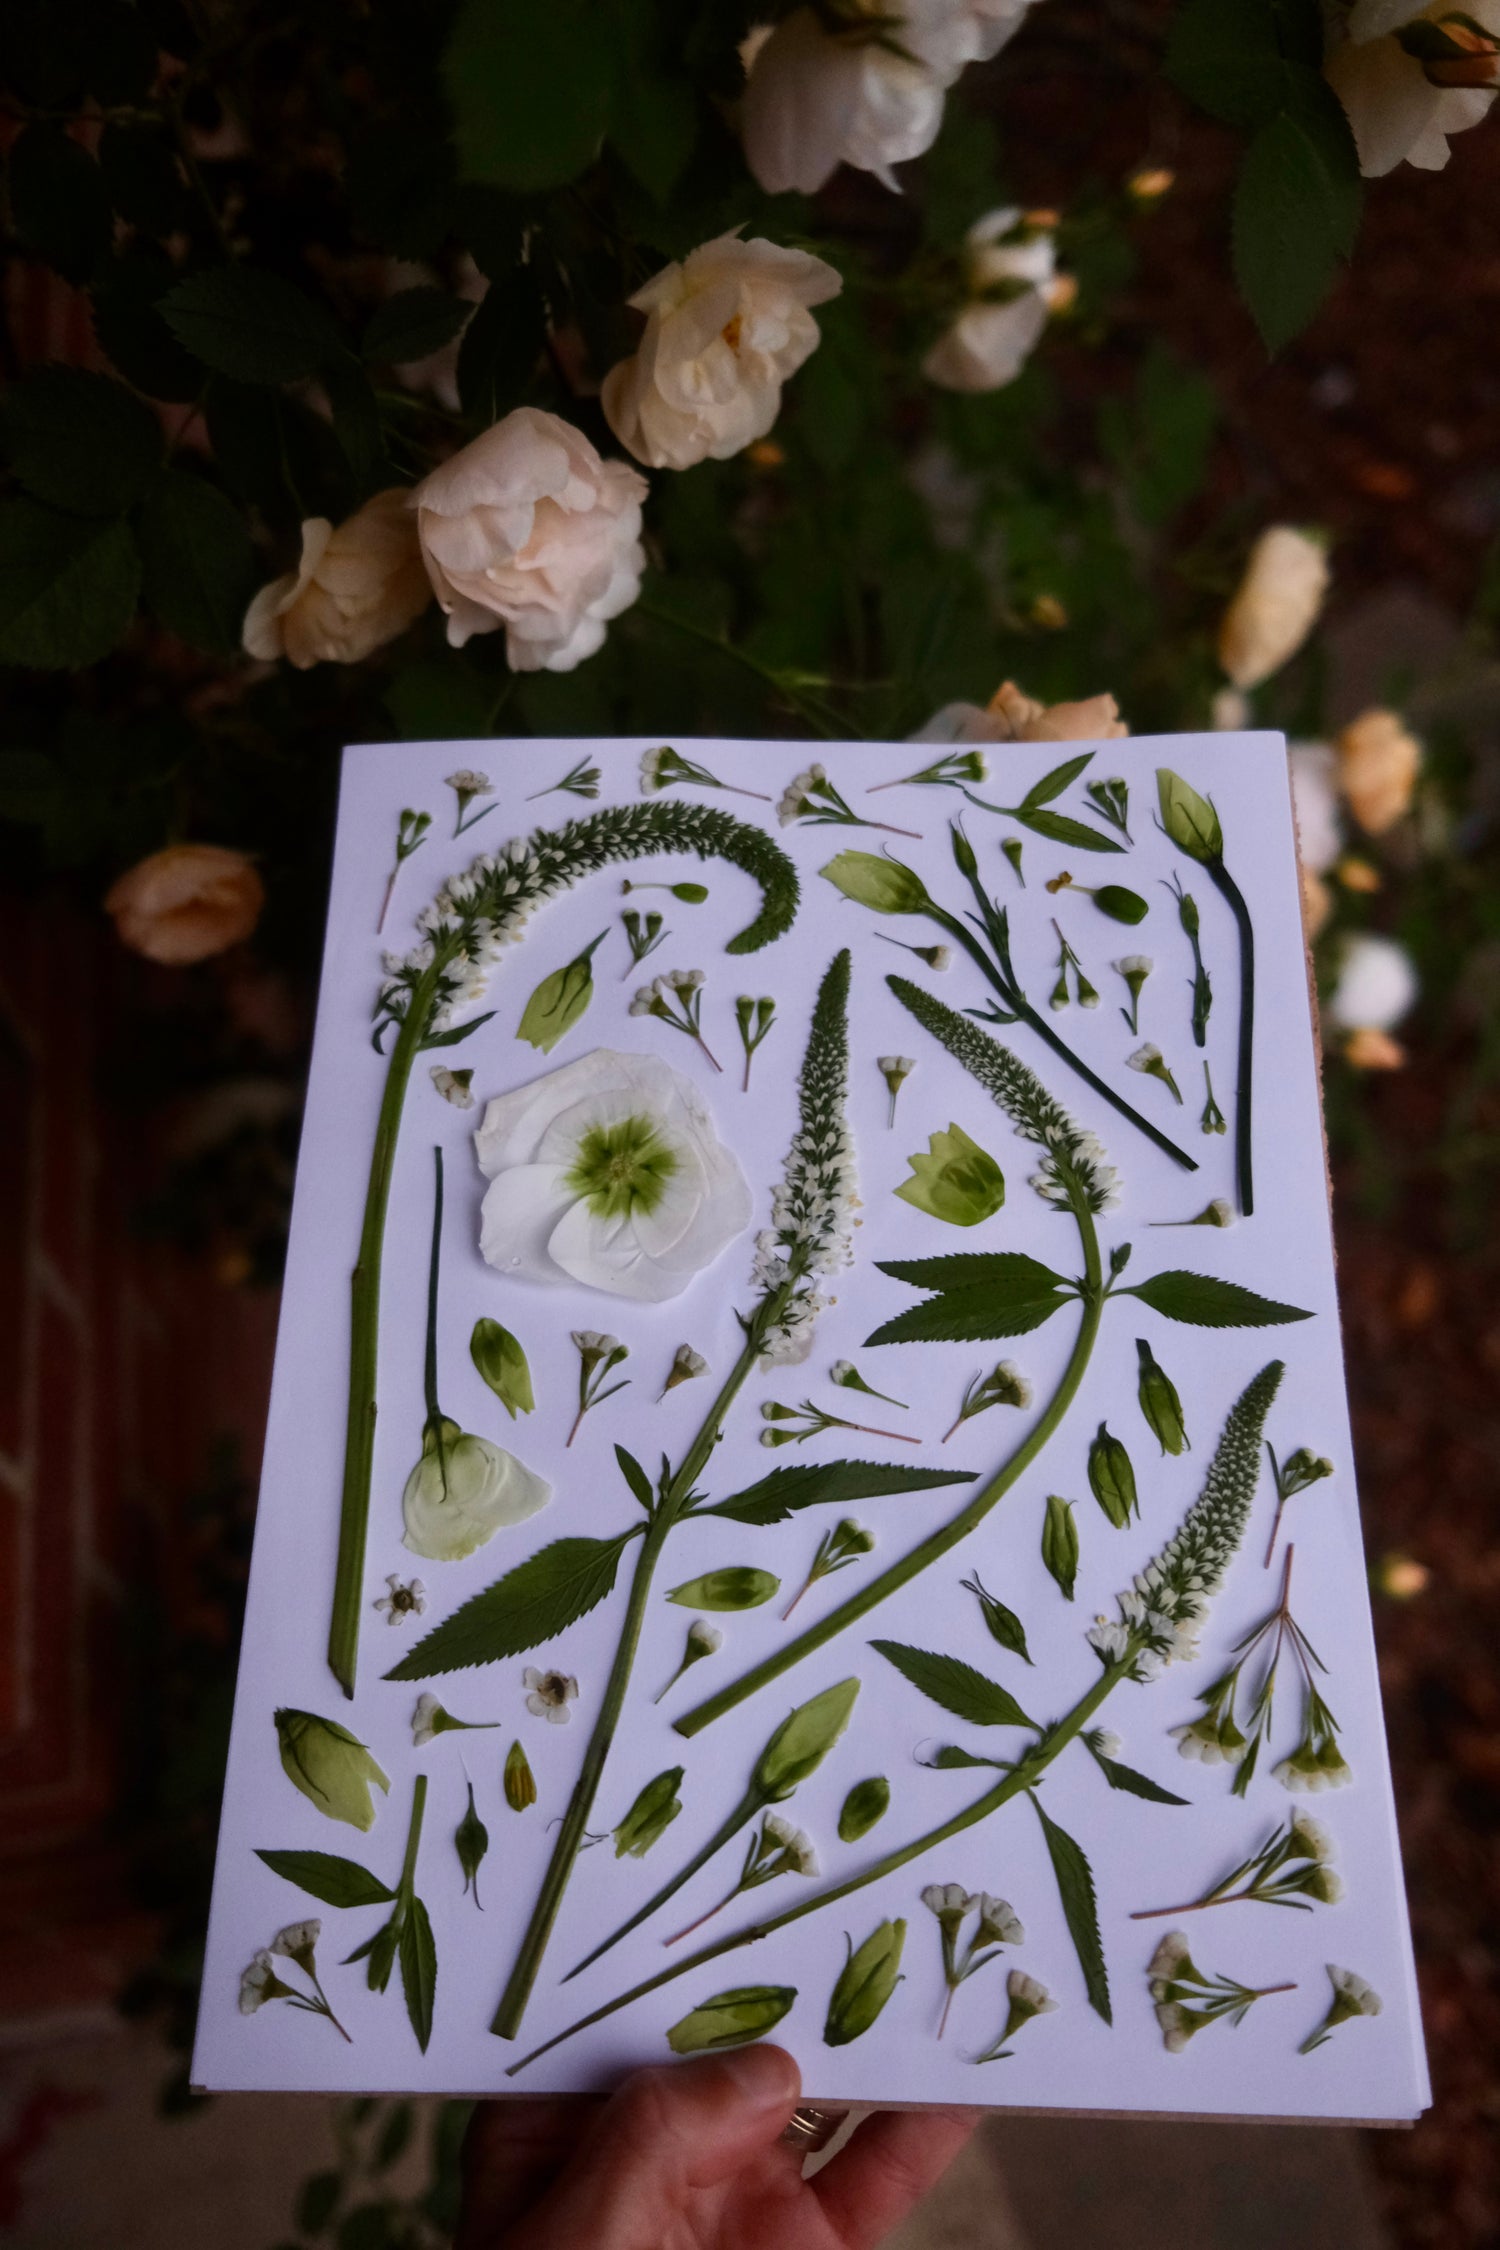 A page of pressed flowers from our flower press with lisianthus, veronica, and wax flower